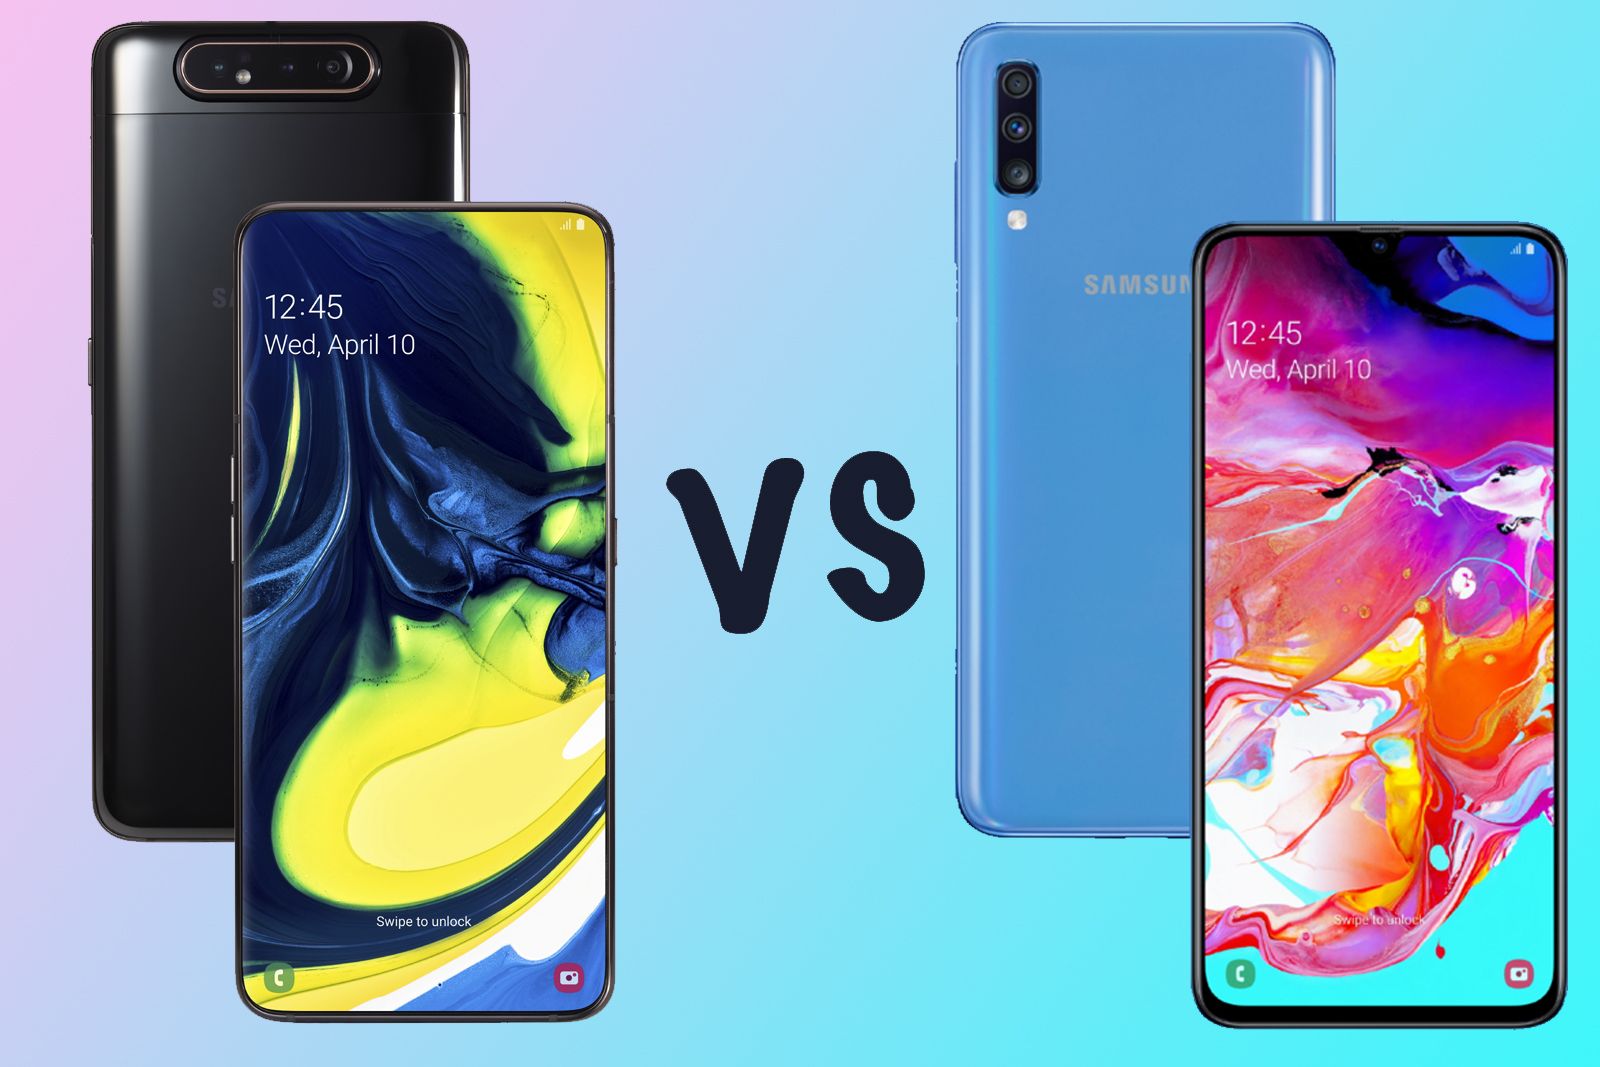 Samsung Galaxy A80 vs Galaxy A70 Whats the difference image 1